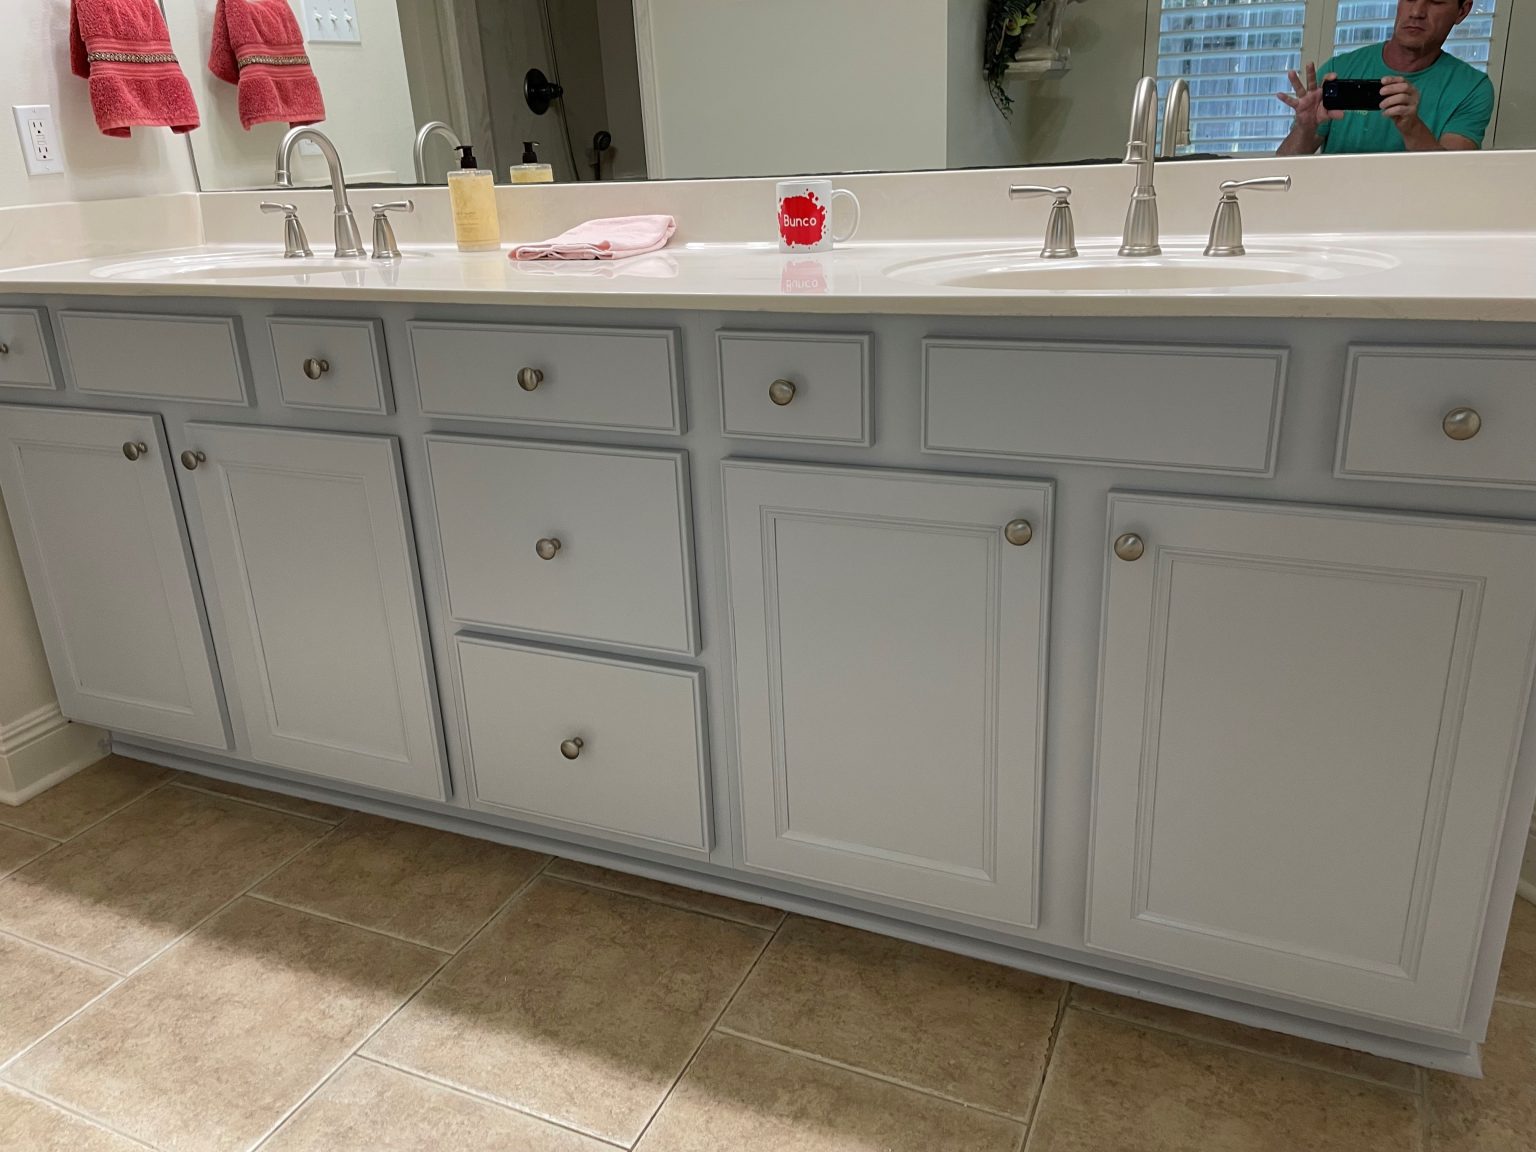 bathroom cabinets after repainting